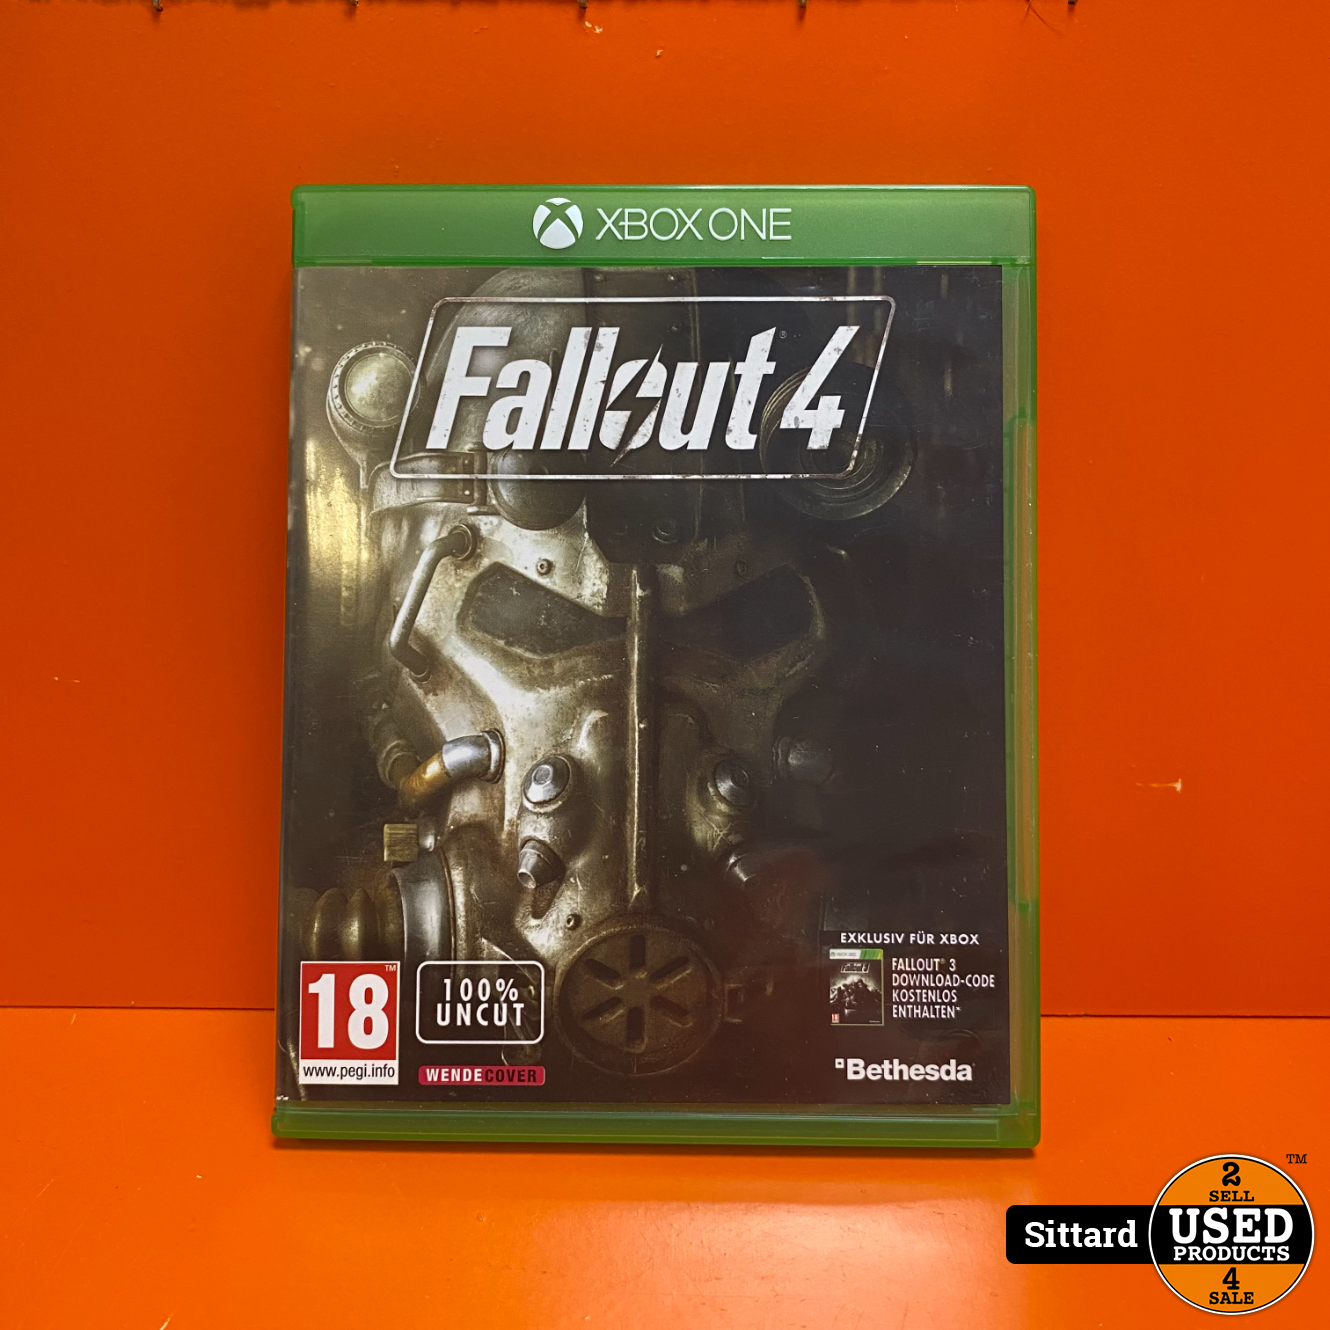 Prestatie Abnormaal koolhydraat Xbox One Game - Fallout 4 - Used Products Sittard